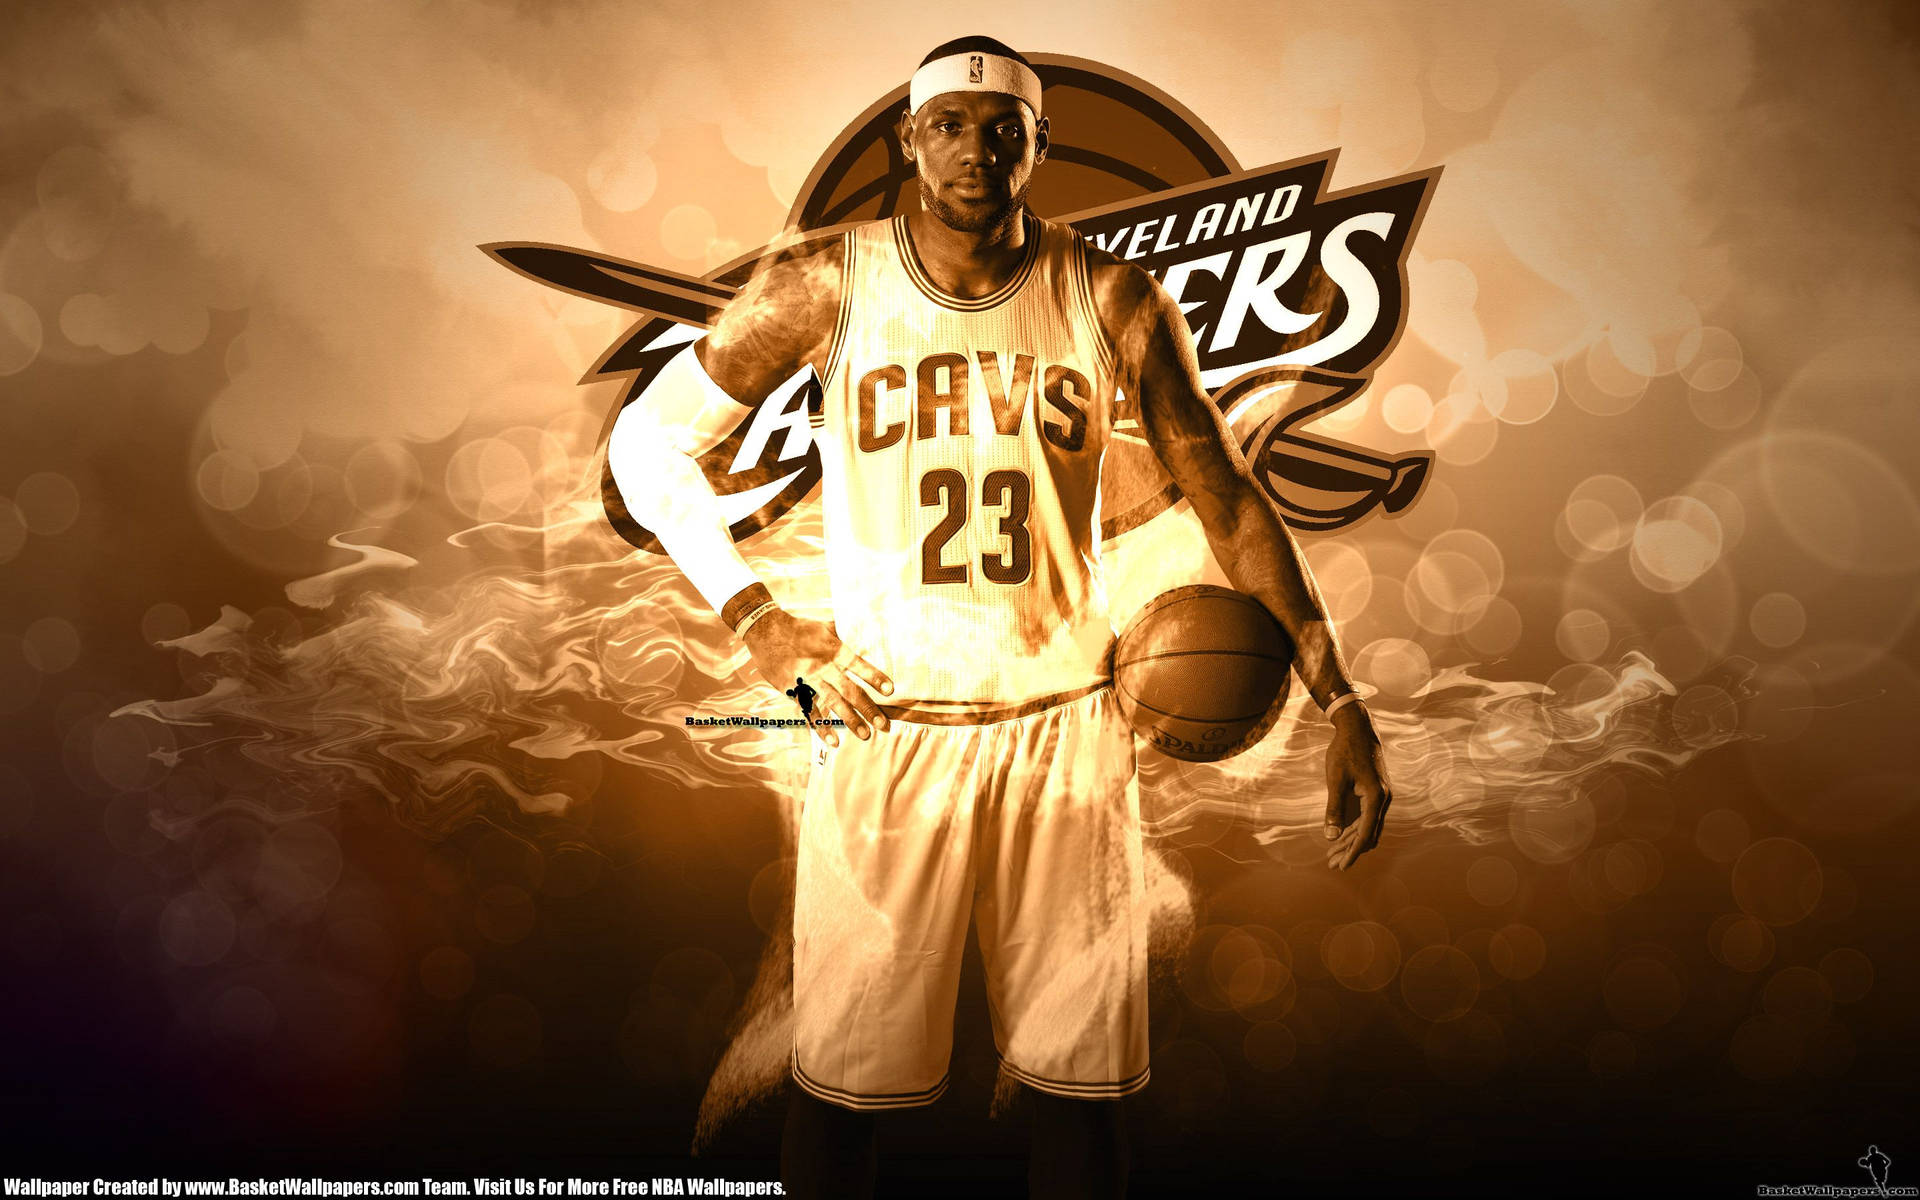 LeBron James proudly wearing the Cleveland Cavaliers jersey Wallpaper